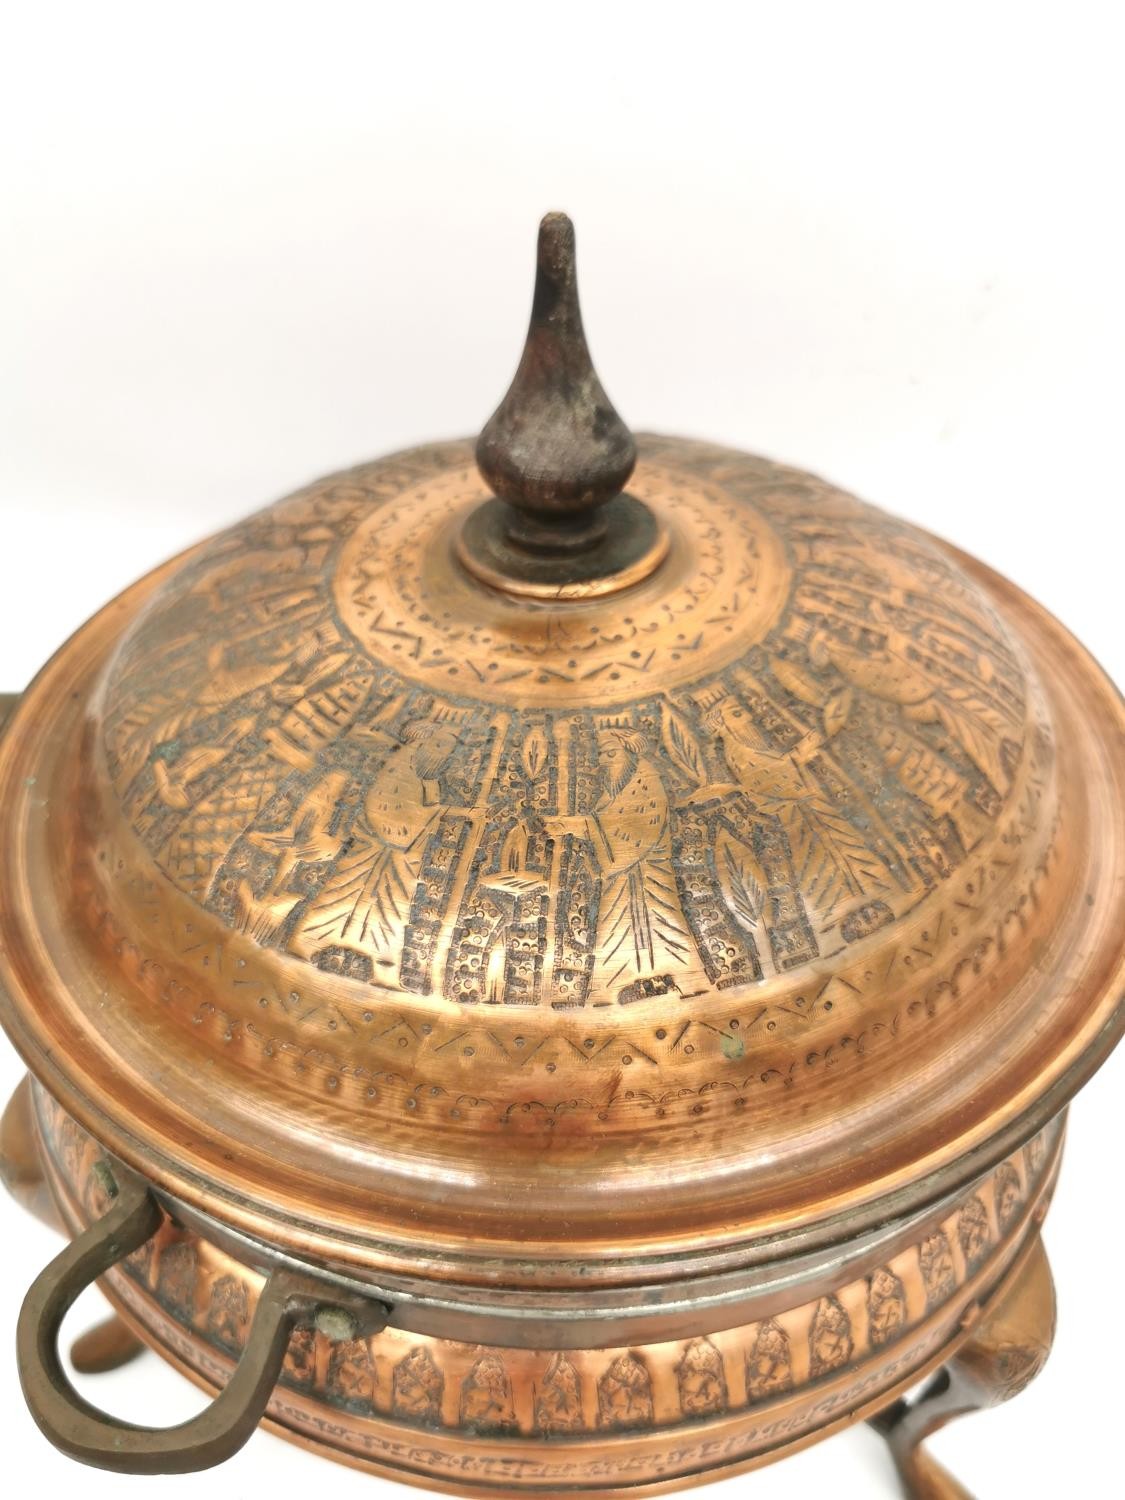 A pair of early 20th century Iranian Nader copper cooking pots with burners with figural design. - Image 3 of 6